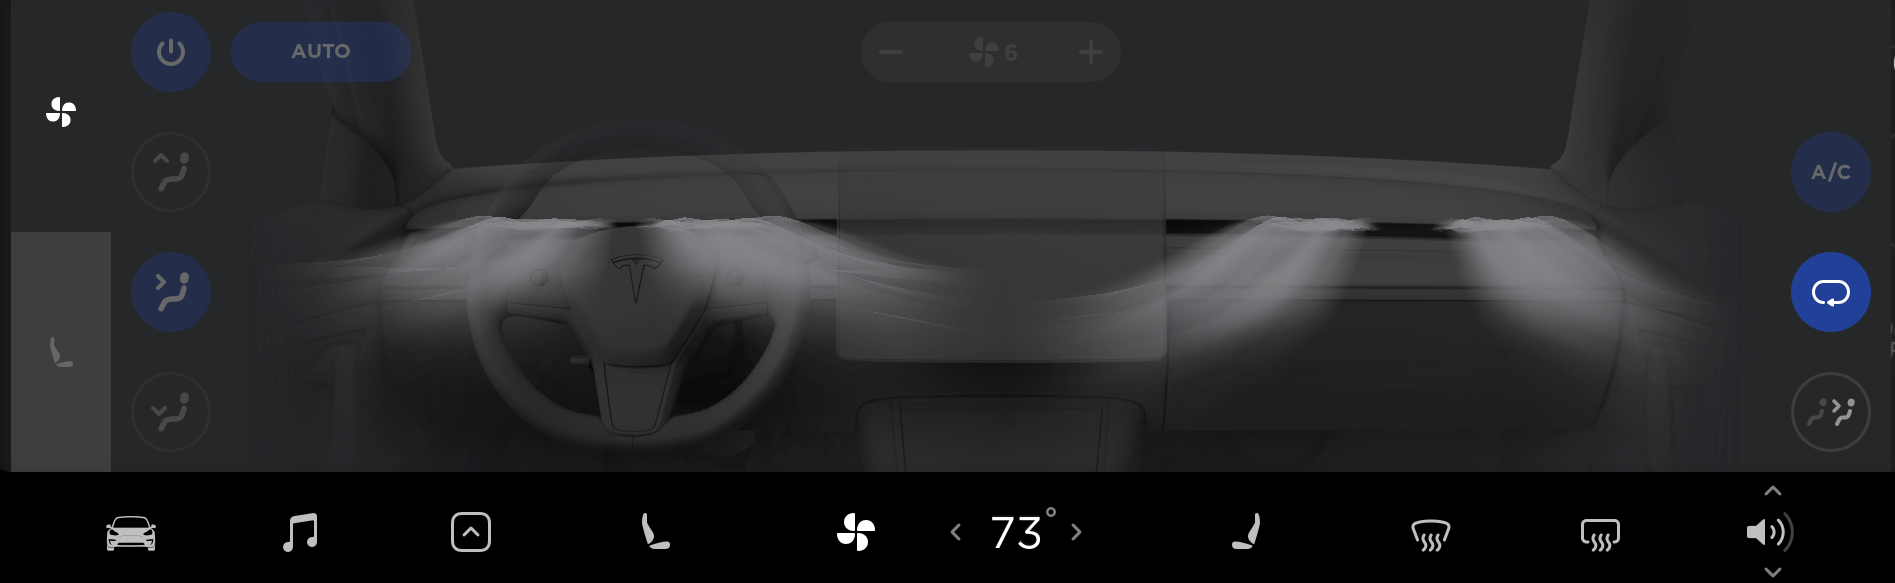 Tesla Climate Control feature in update 2018.42.3